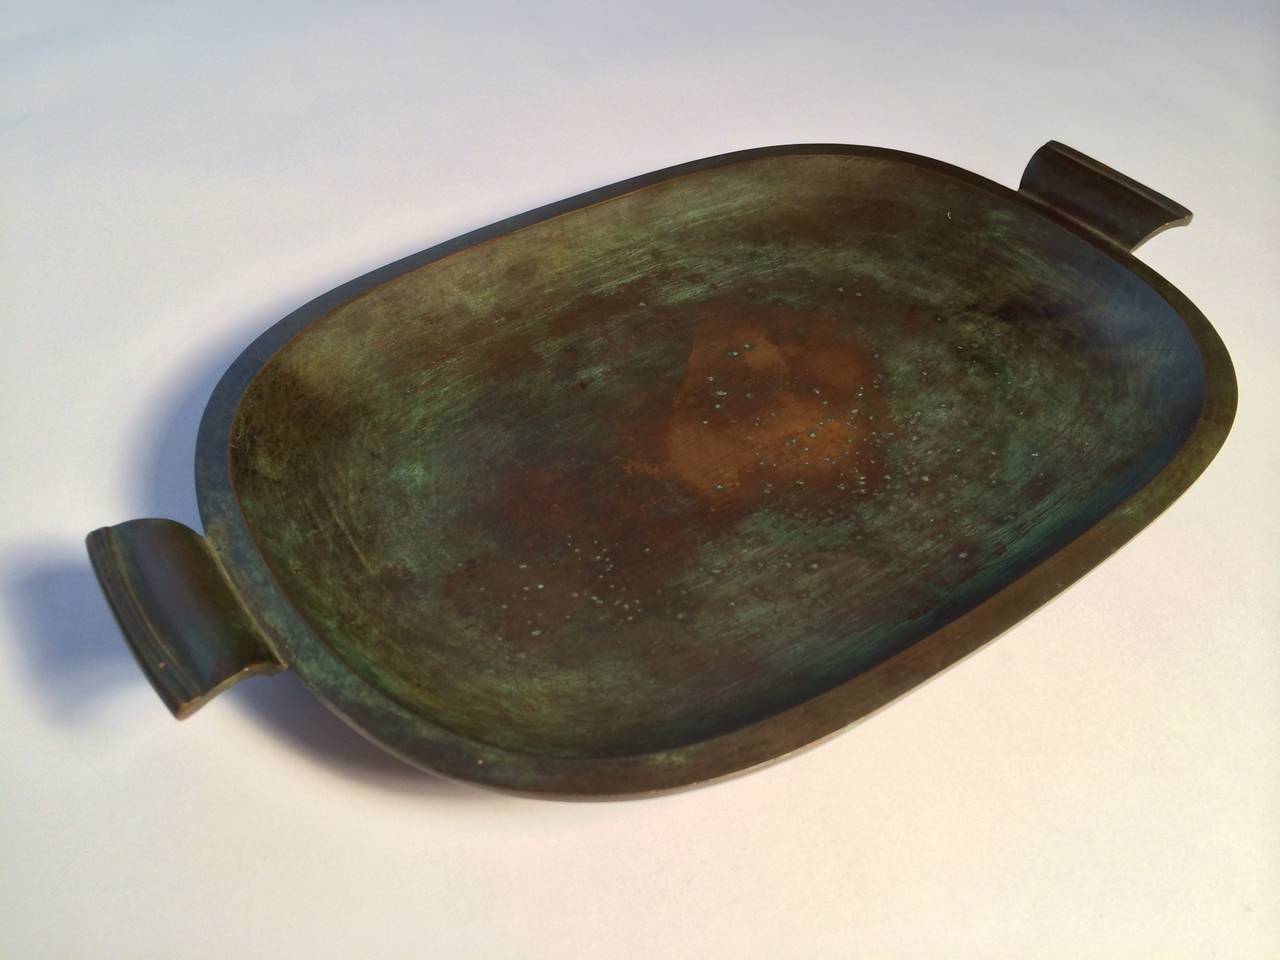 An Art Deco period patinated bronze dish designed by Just Andersen and manufactured by GAB, Sweden.